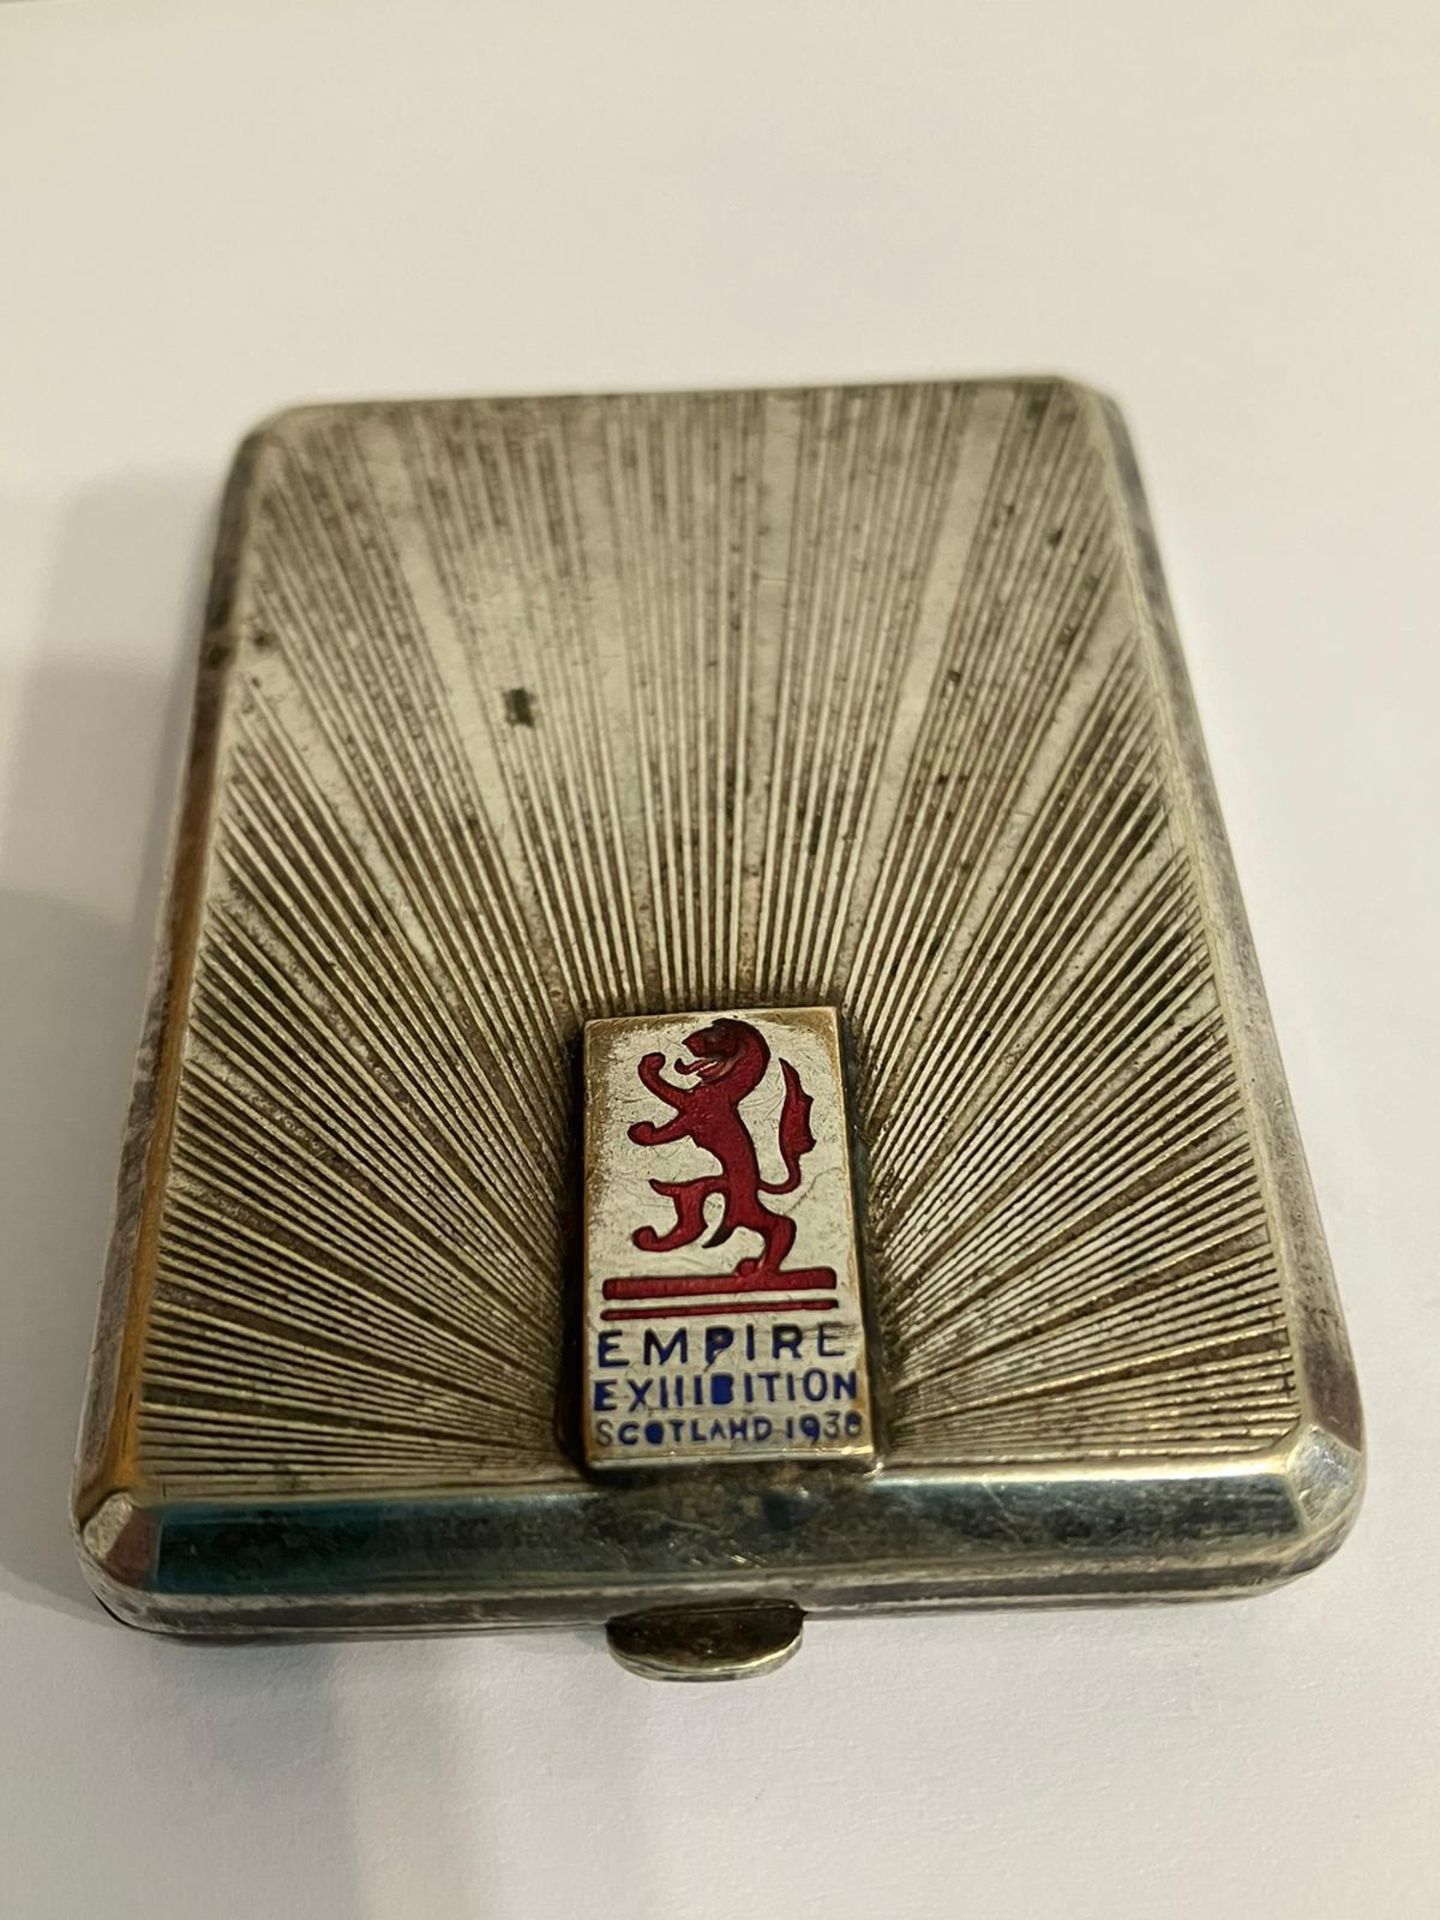 Antique SILVER PLATED MATCHBOOK CASE having the words EMPIRE EXHIBITION SCOTLAND 1938 with a rampant